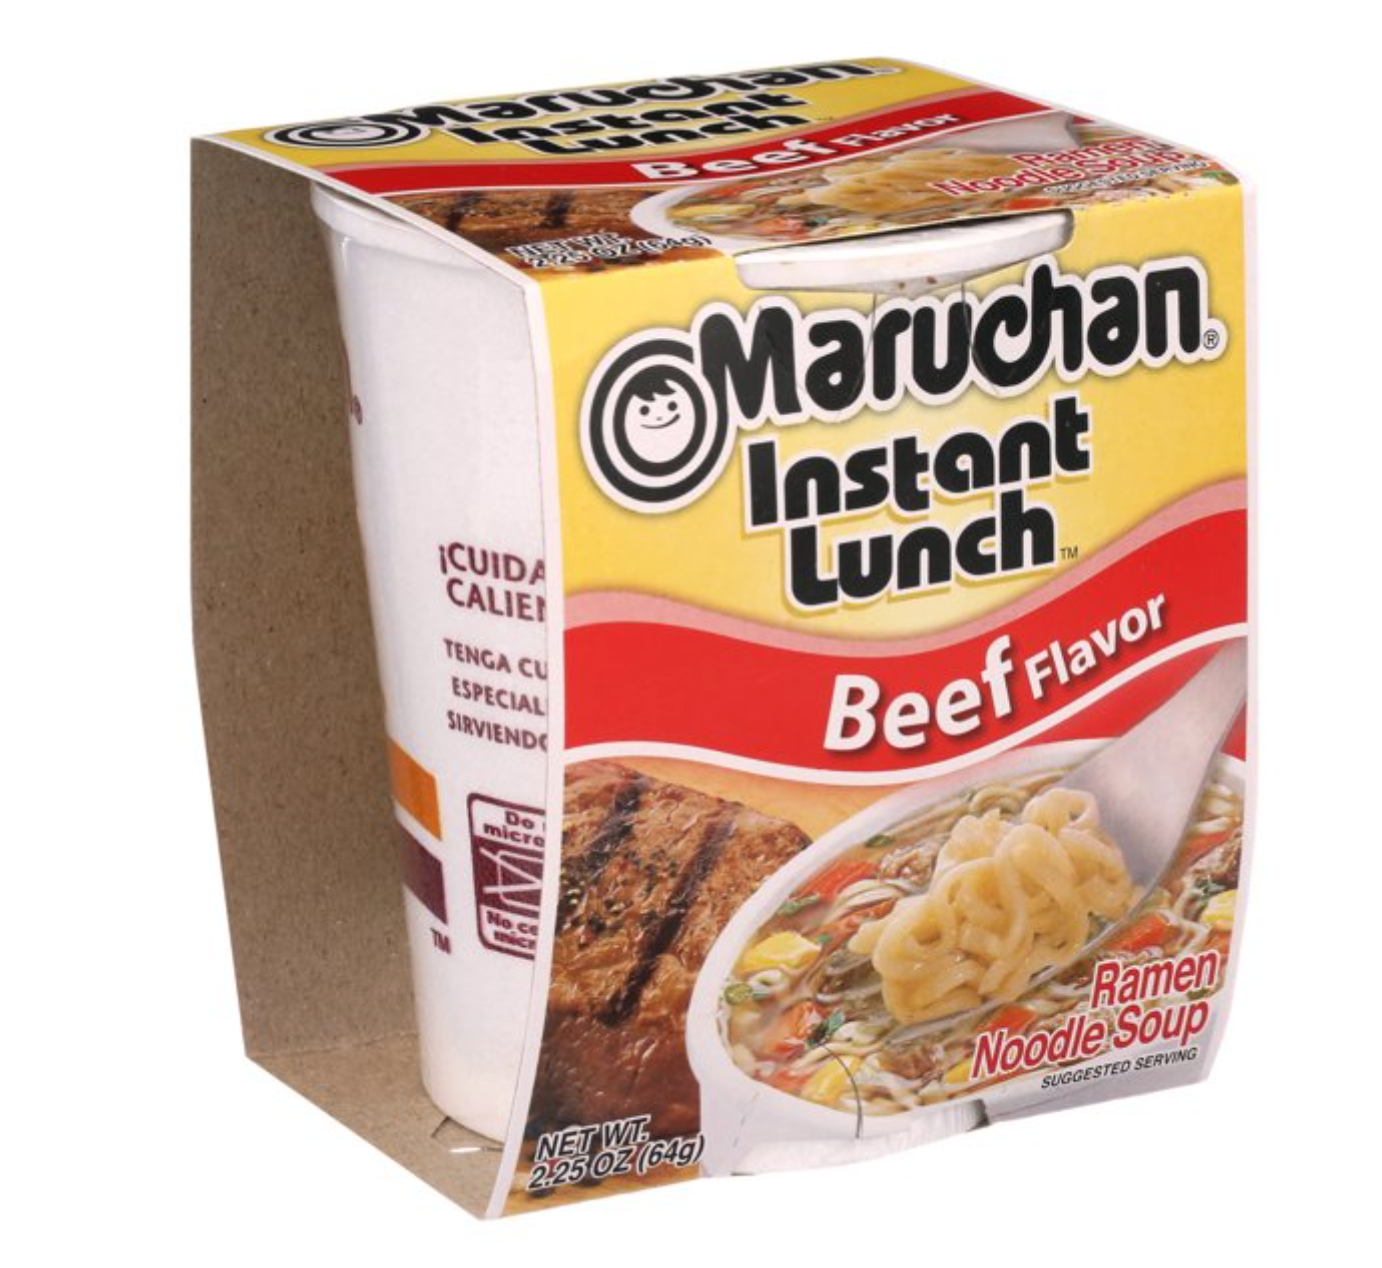  Maruchan Ramen cup Instant Soup Noodles Mix Variety 3 Flavor  Packs 12 Count - 4 Cheddar Cheese, 4 Chili Piquin & Shrimp, 4 Hot & Spicy  Beef, Pack Lunch/Dinner Variety : Grocery & Gourmet Food